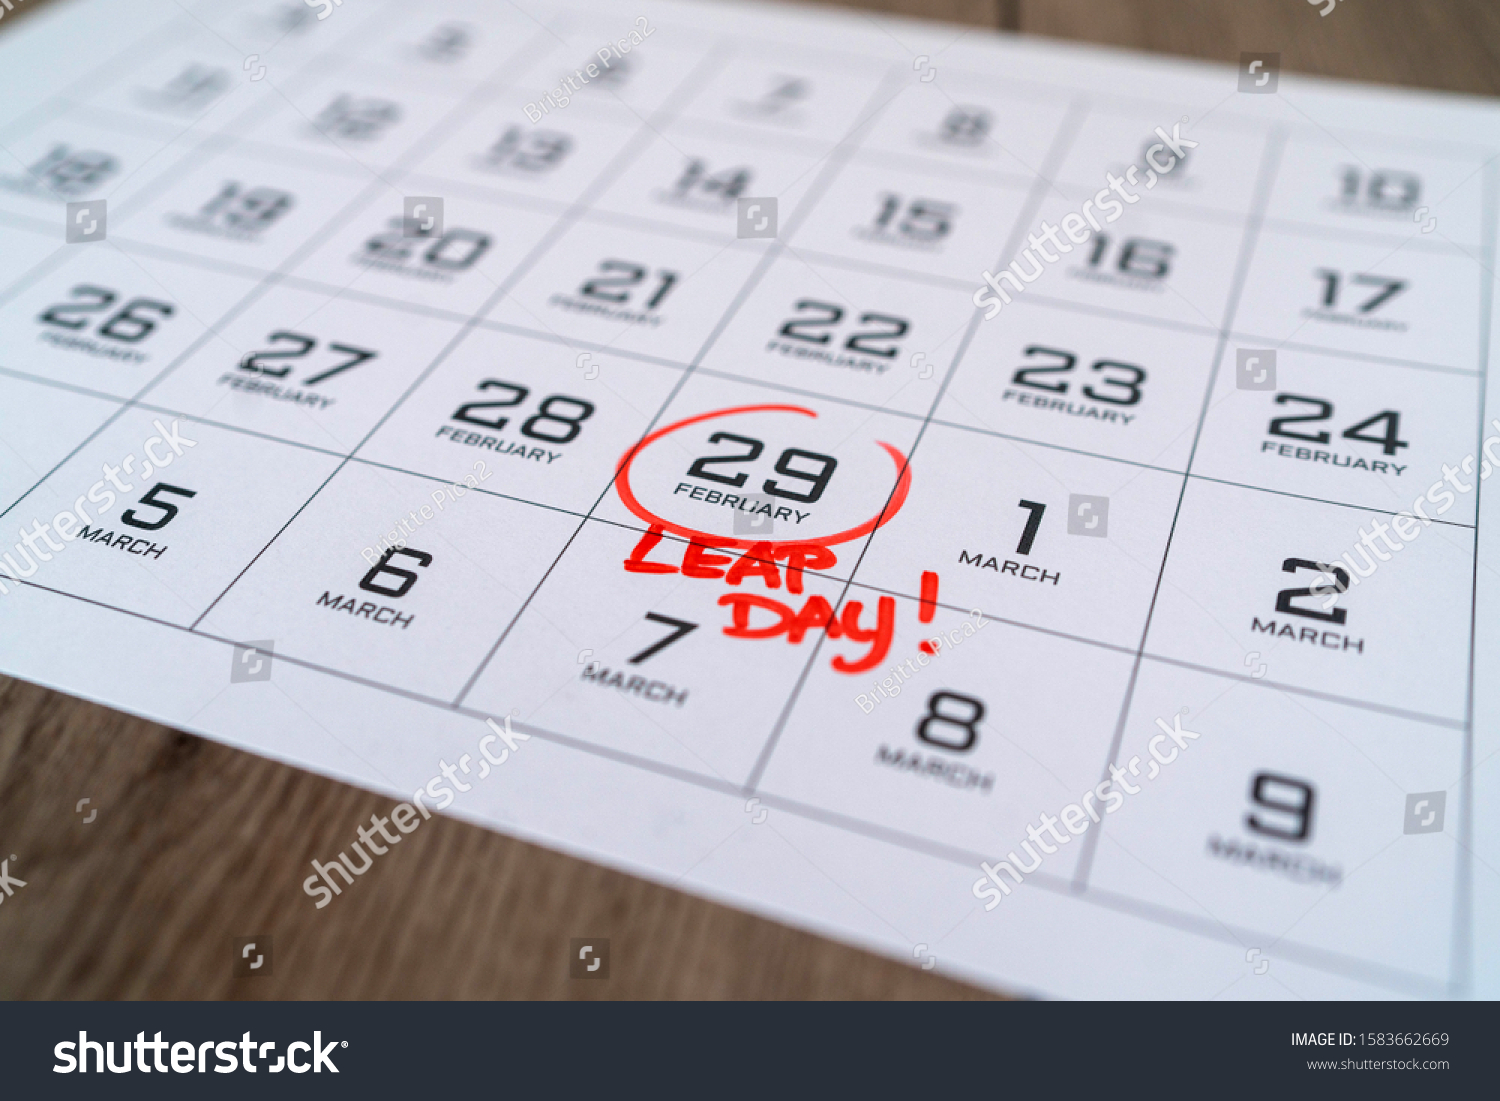 Calendar with marking in red ink of leap day: 29 february. With handwritten text of leap day. Close up with small depth of field. #1583662669